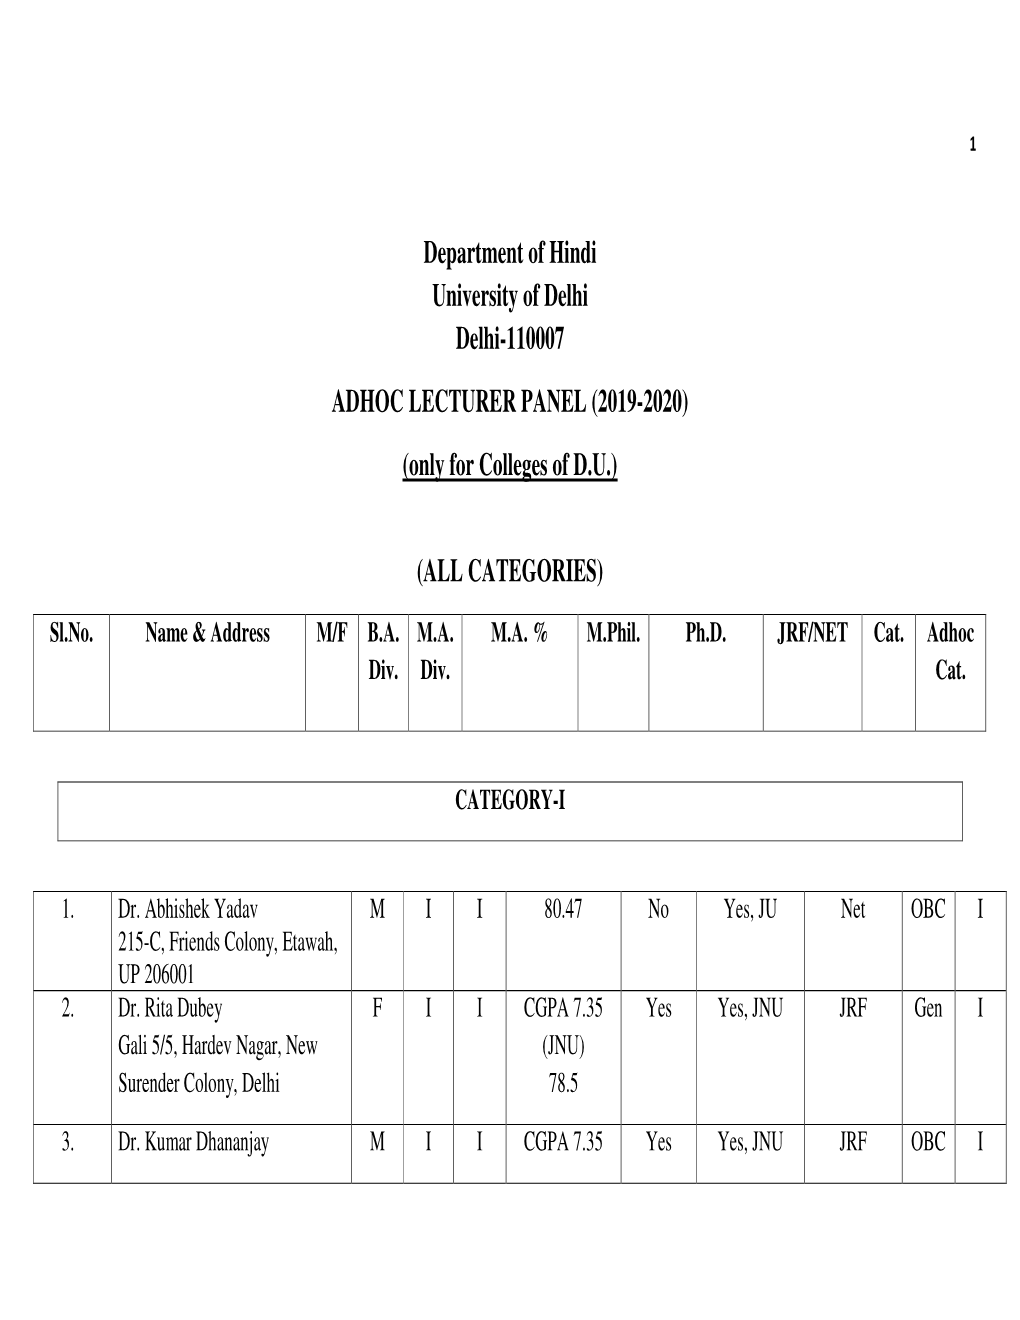 Department of Hindi University of Delhi Delhi-110007 ADHOC LECTURER PANEL (2019-2020) (Only for Colleges of D.U.)